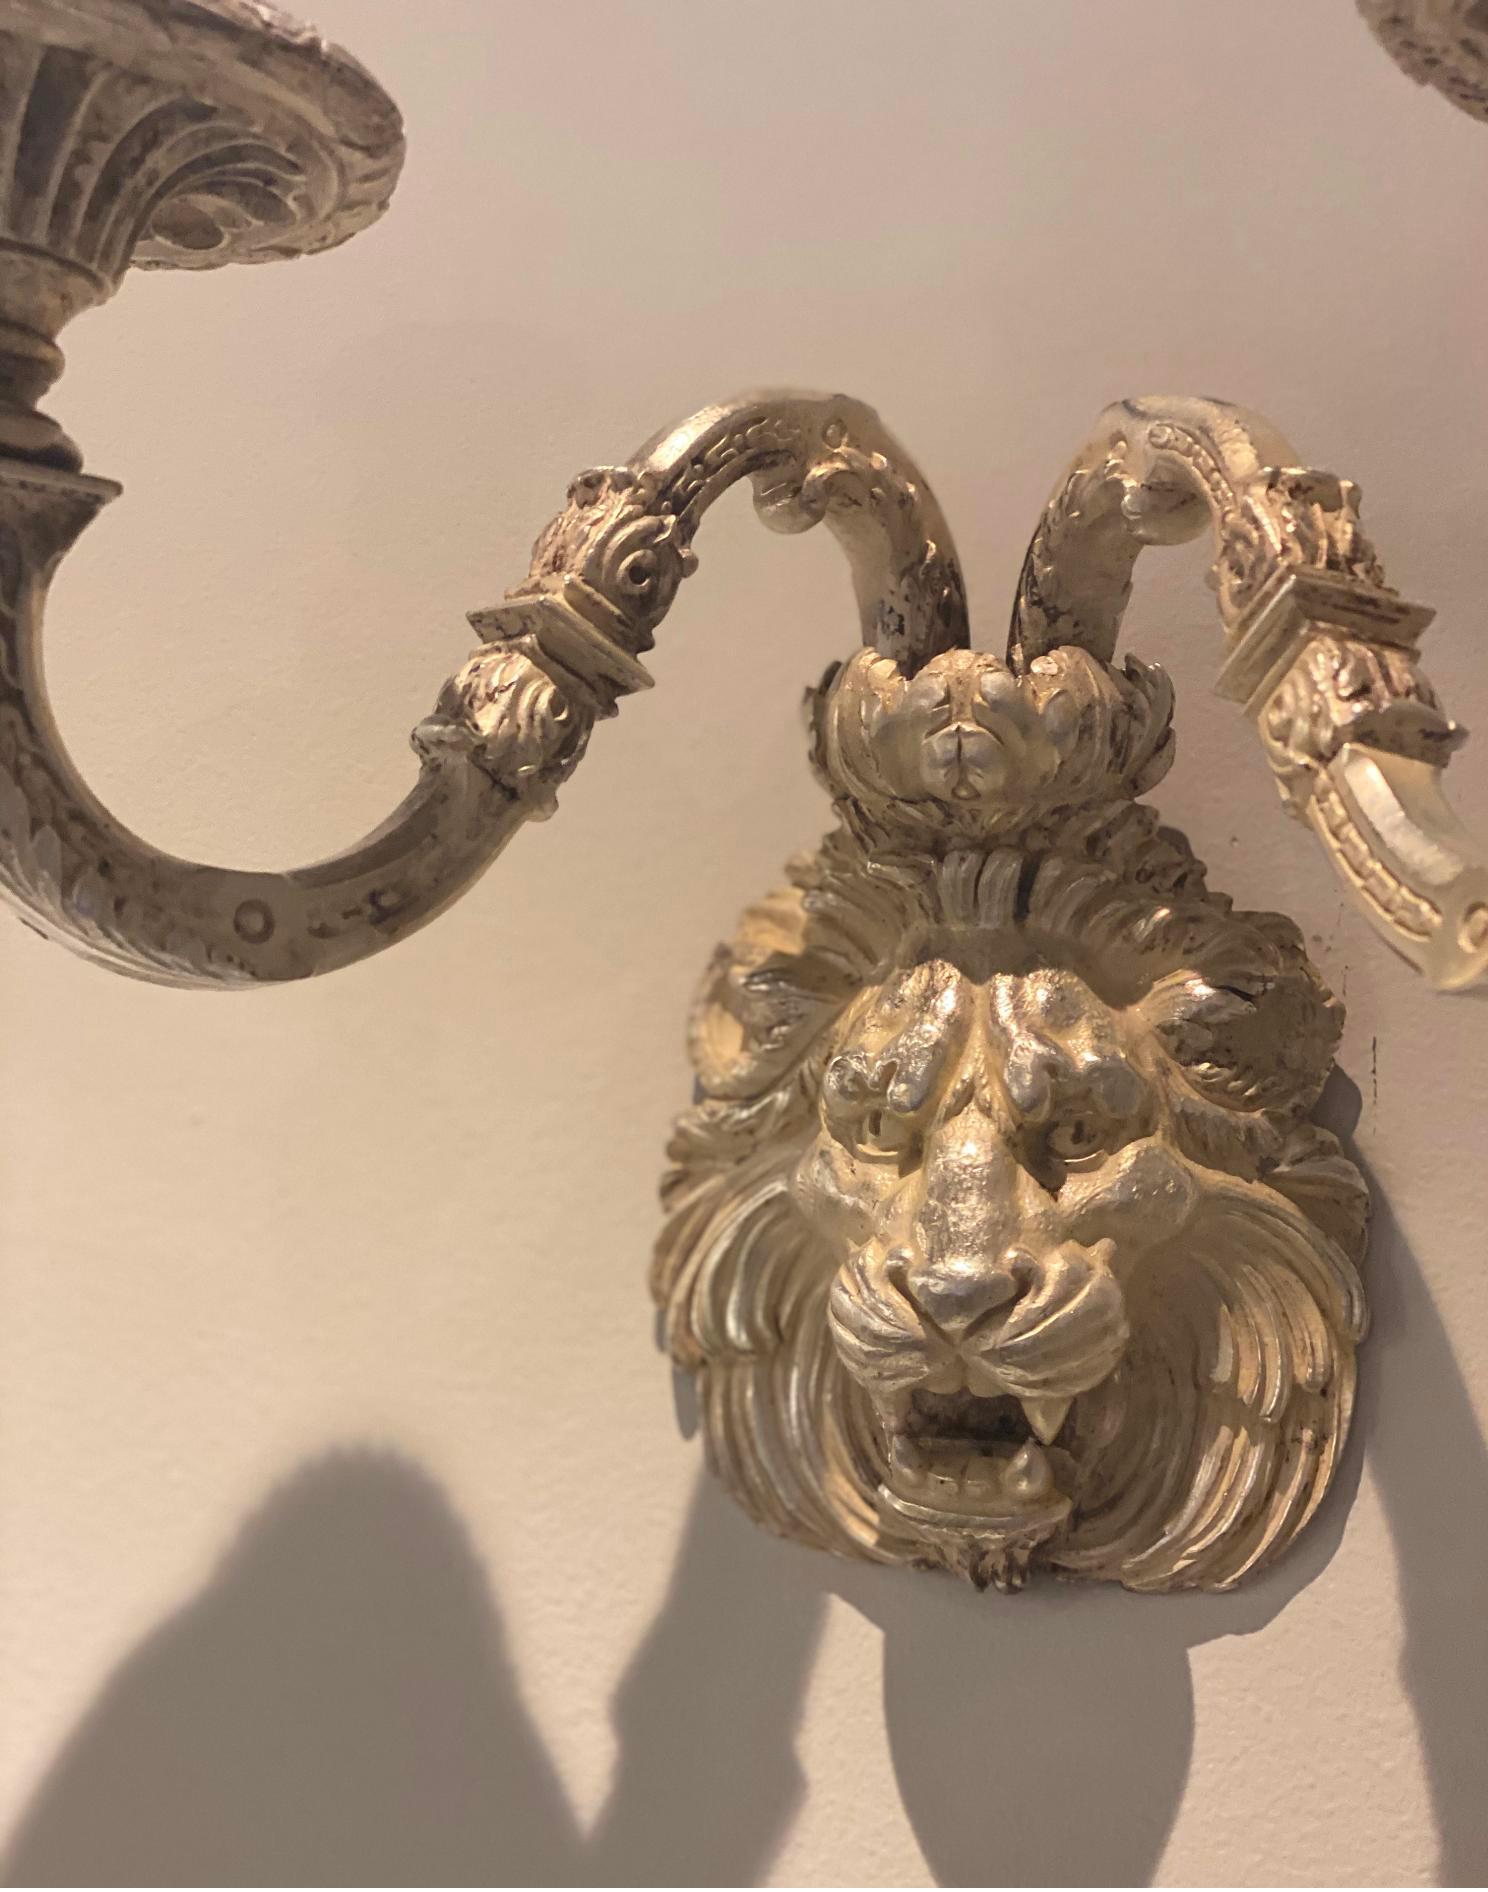 A pair of Neoclassical Caldwell sconces with lion's head design, circa 1900s. In very good vintage condition.

Dealer: G302YP